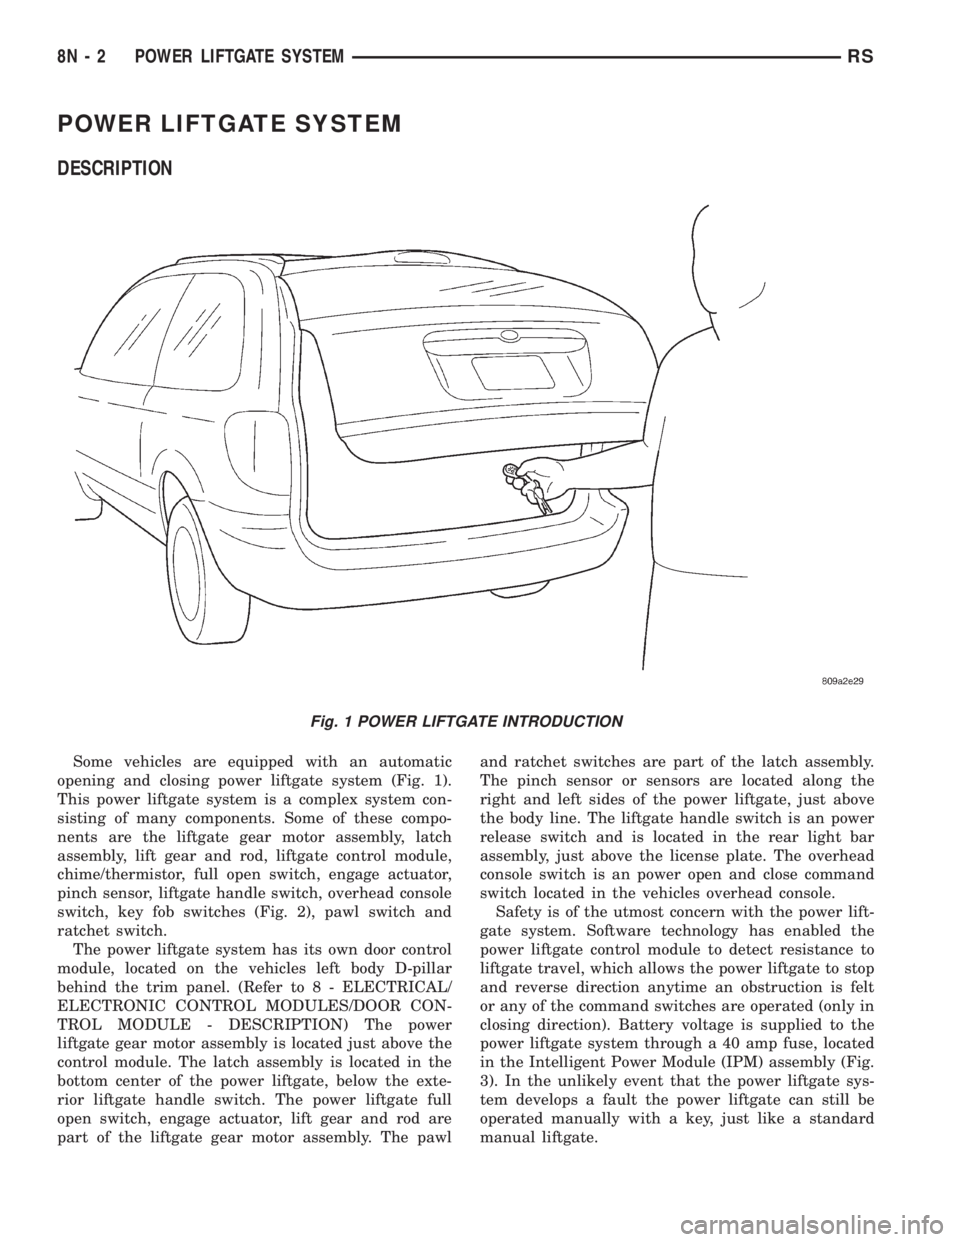 CHRYSLER VOYAGER 2001  Service Manual POWER LIFTGATE SYSTEM
DESCRIPTION
Some vehicles are equipped with an automatic
opening and closing power liftgate system (Fig. 1).
This power liftgate system is a complex system con-
sisting of many c